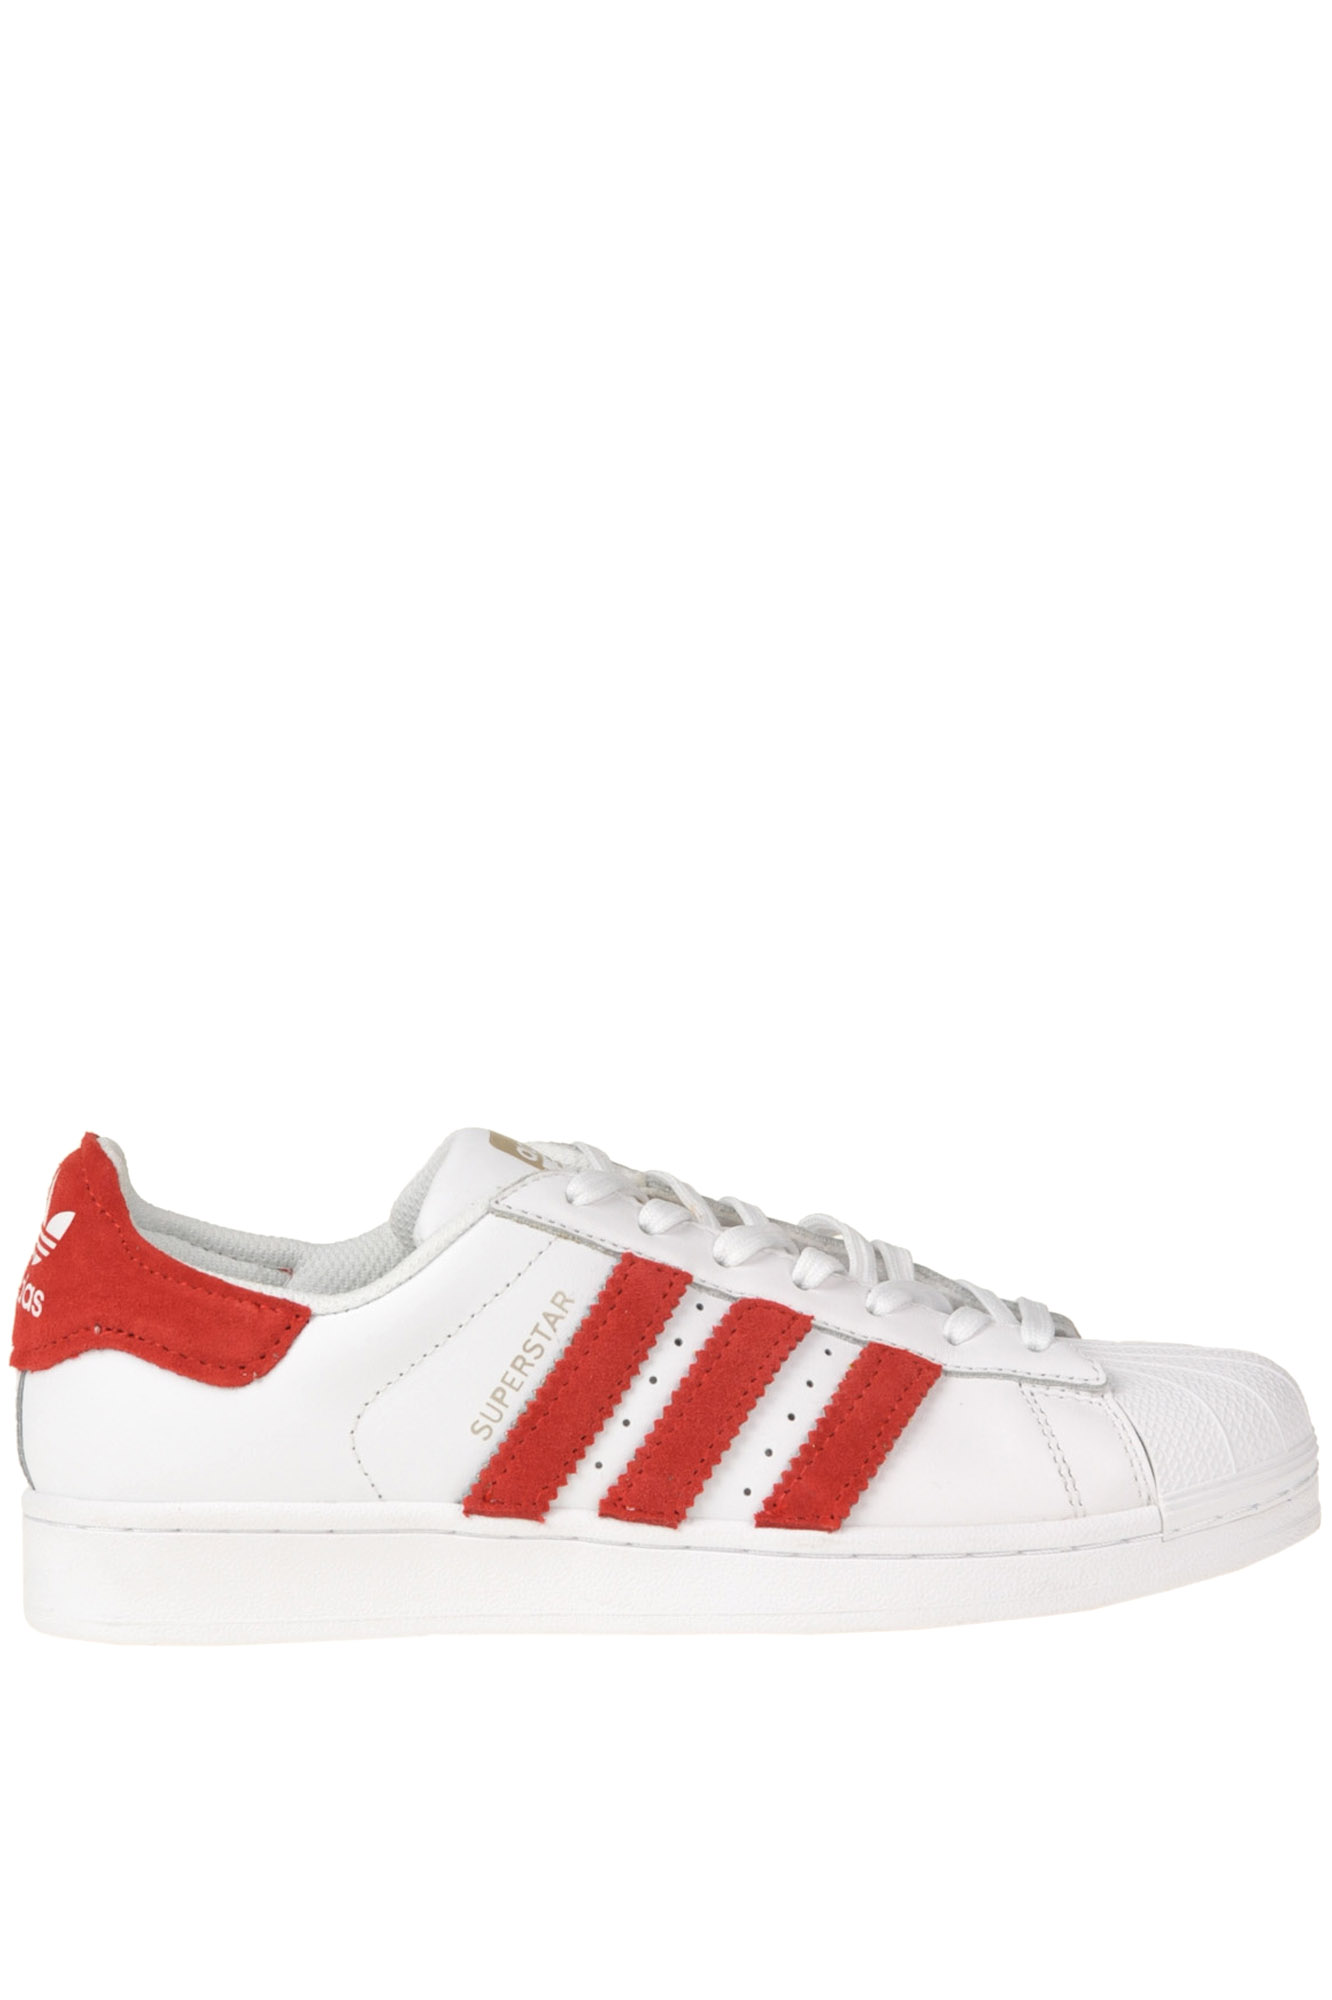 Adidas By Dressed Superstar Customized Sneakers In White